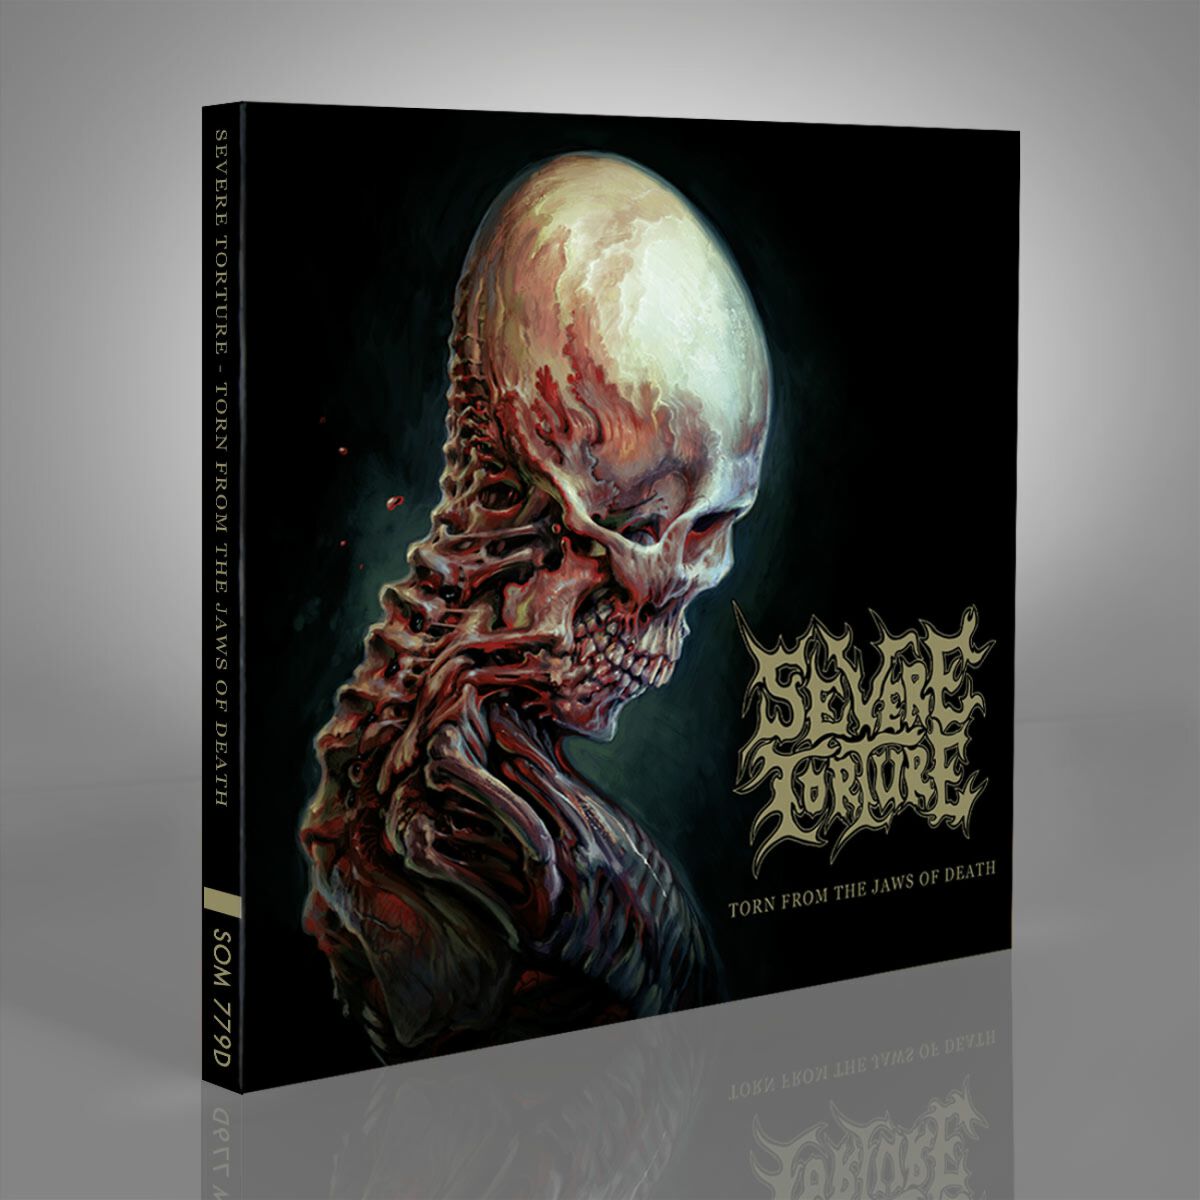 Torn from the jaws of Death von Severe Torture - CD (Digipak)